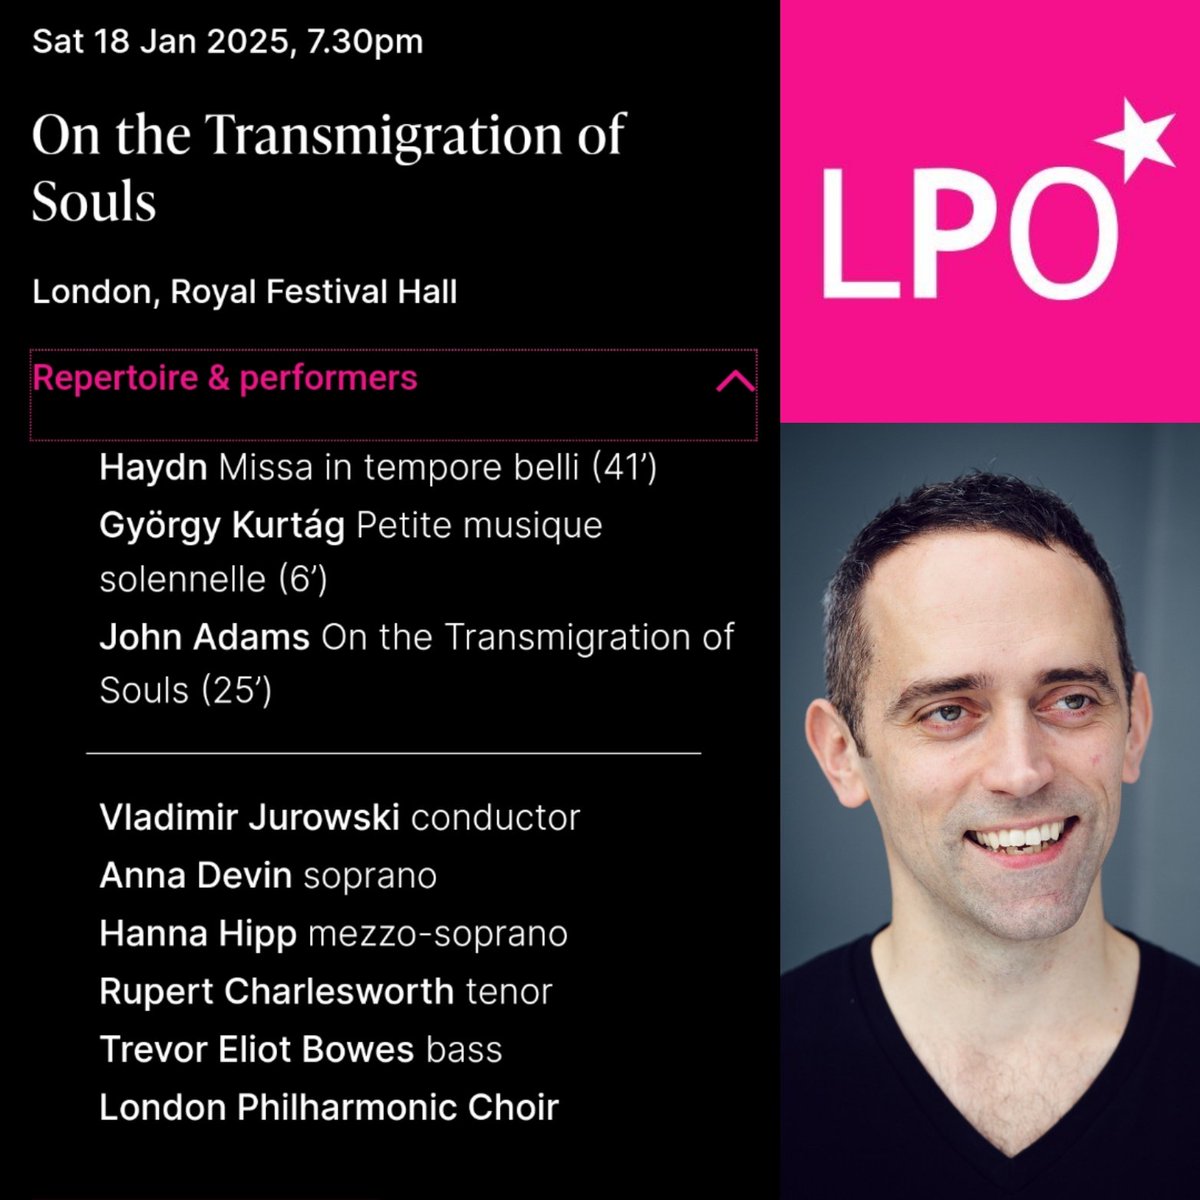 It's official: I'll be making my début with the London Philharmonic Orchestra and Vladimir Jurowski in 2025. I'm so excited! Come join us for this fantastic programme. Details in link. lpo.org.uk/event/on-the-t…